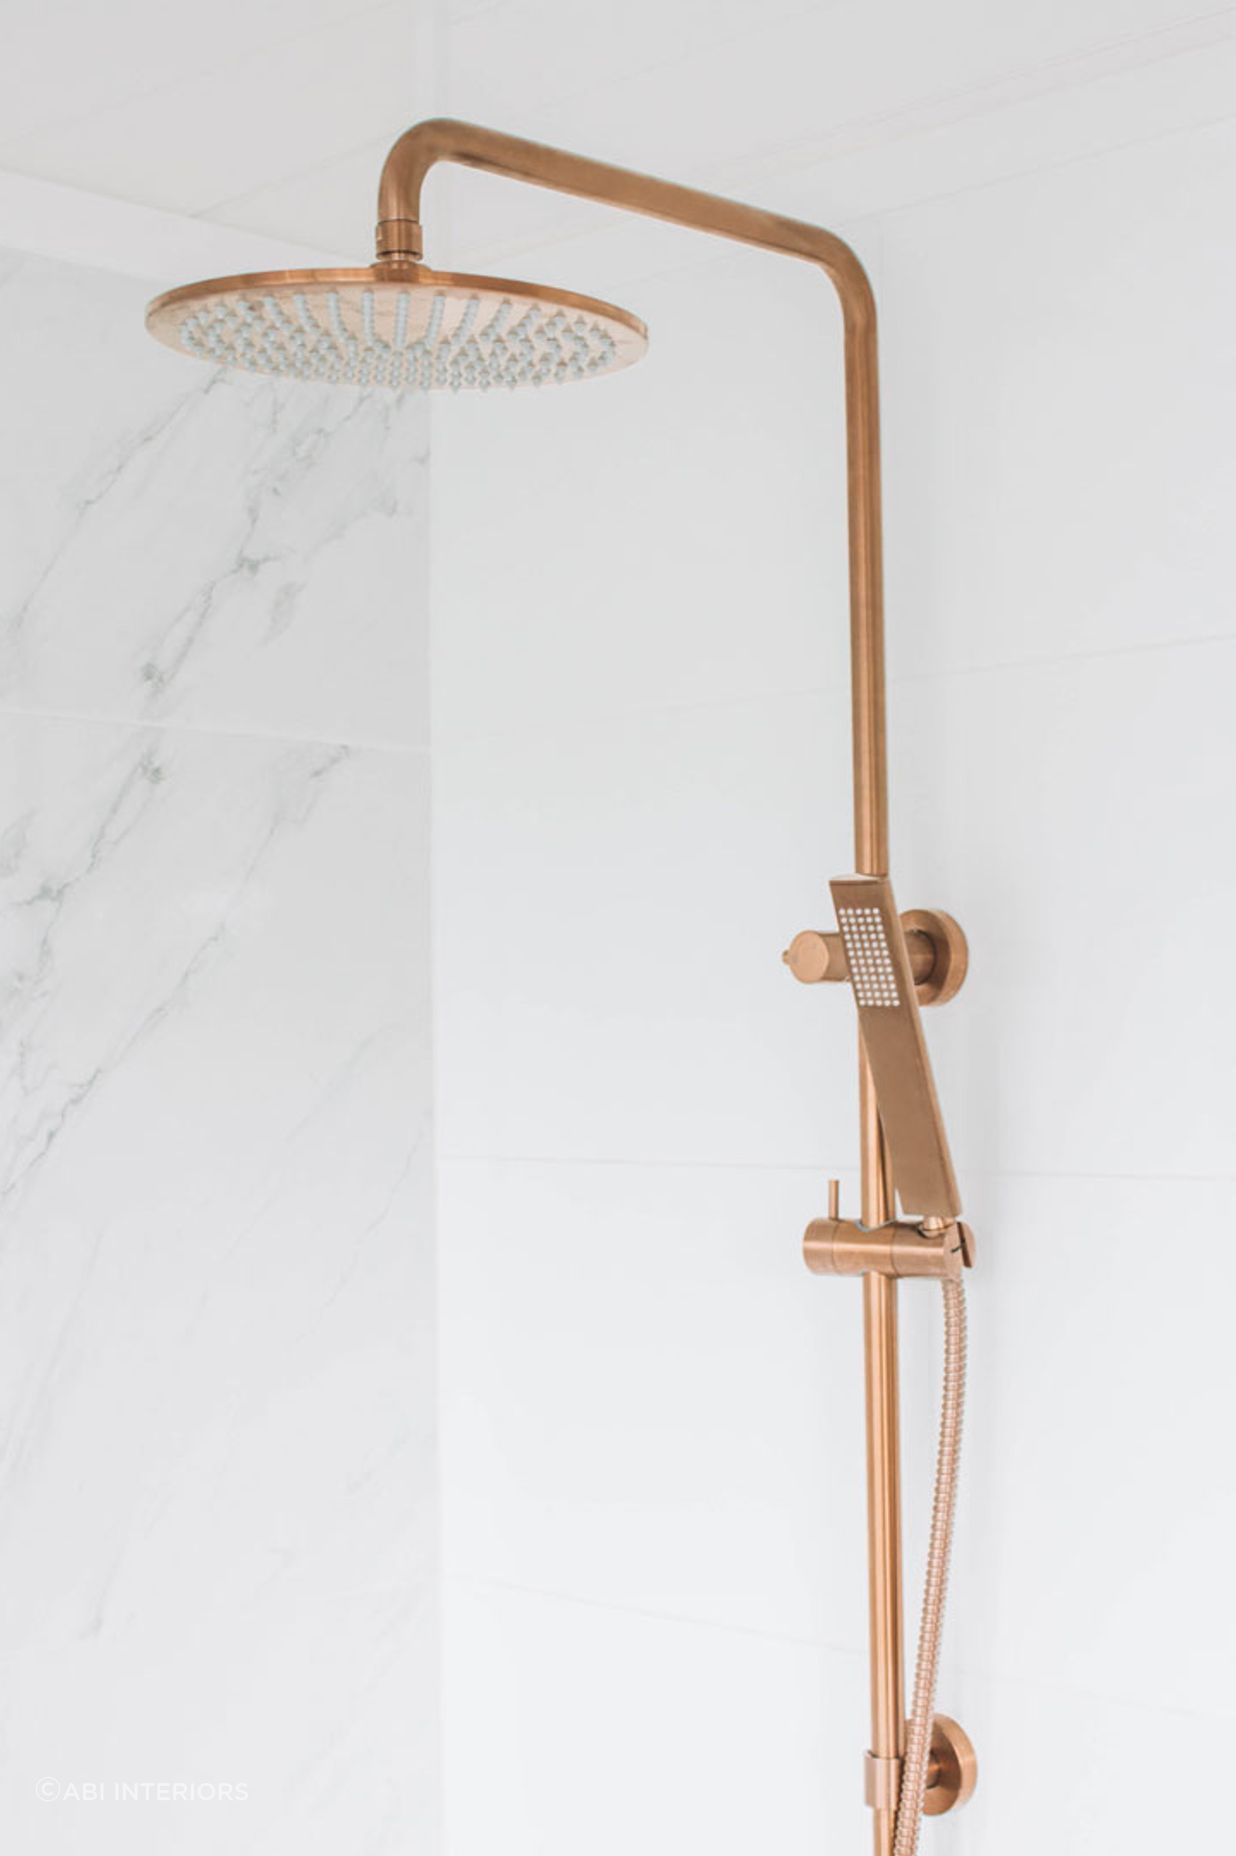 A rail shower head or set can typically be adjusted along a vertical bar. Featured product: ABI Finley Shower Rail Set.